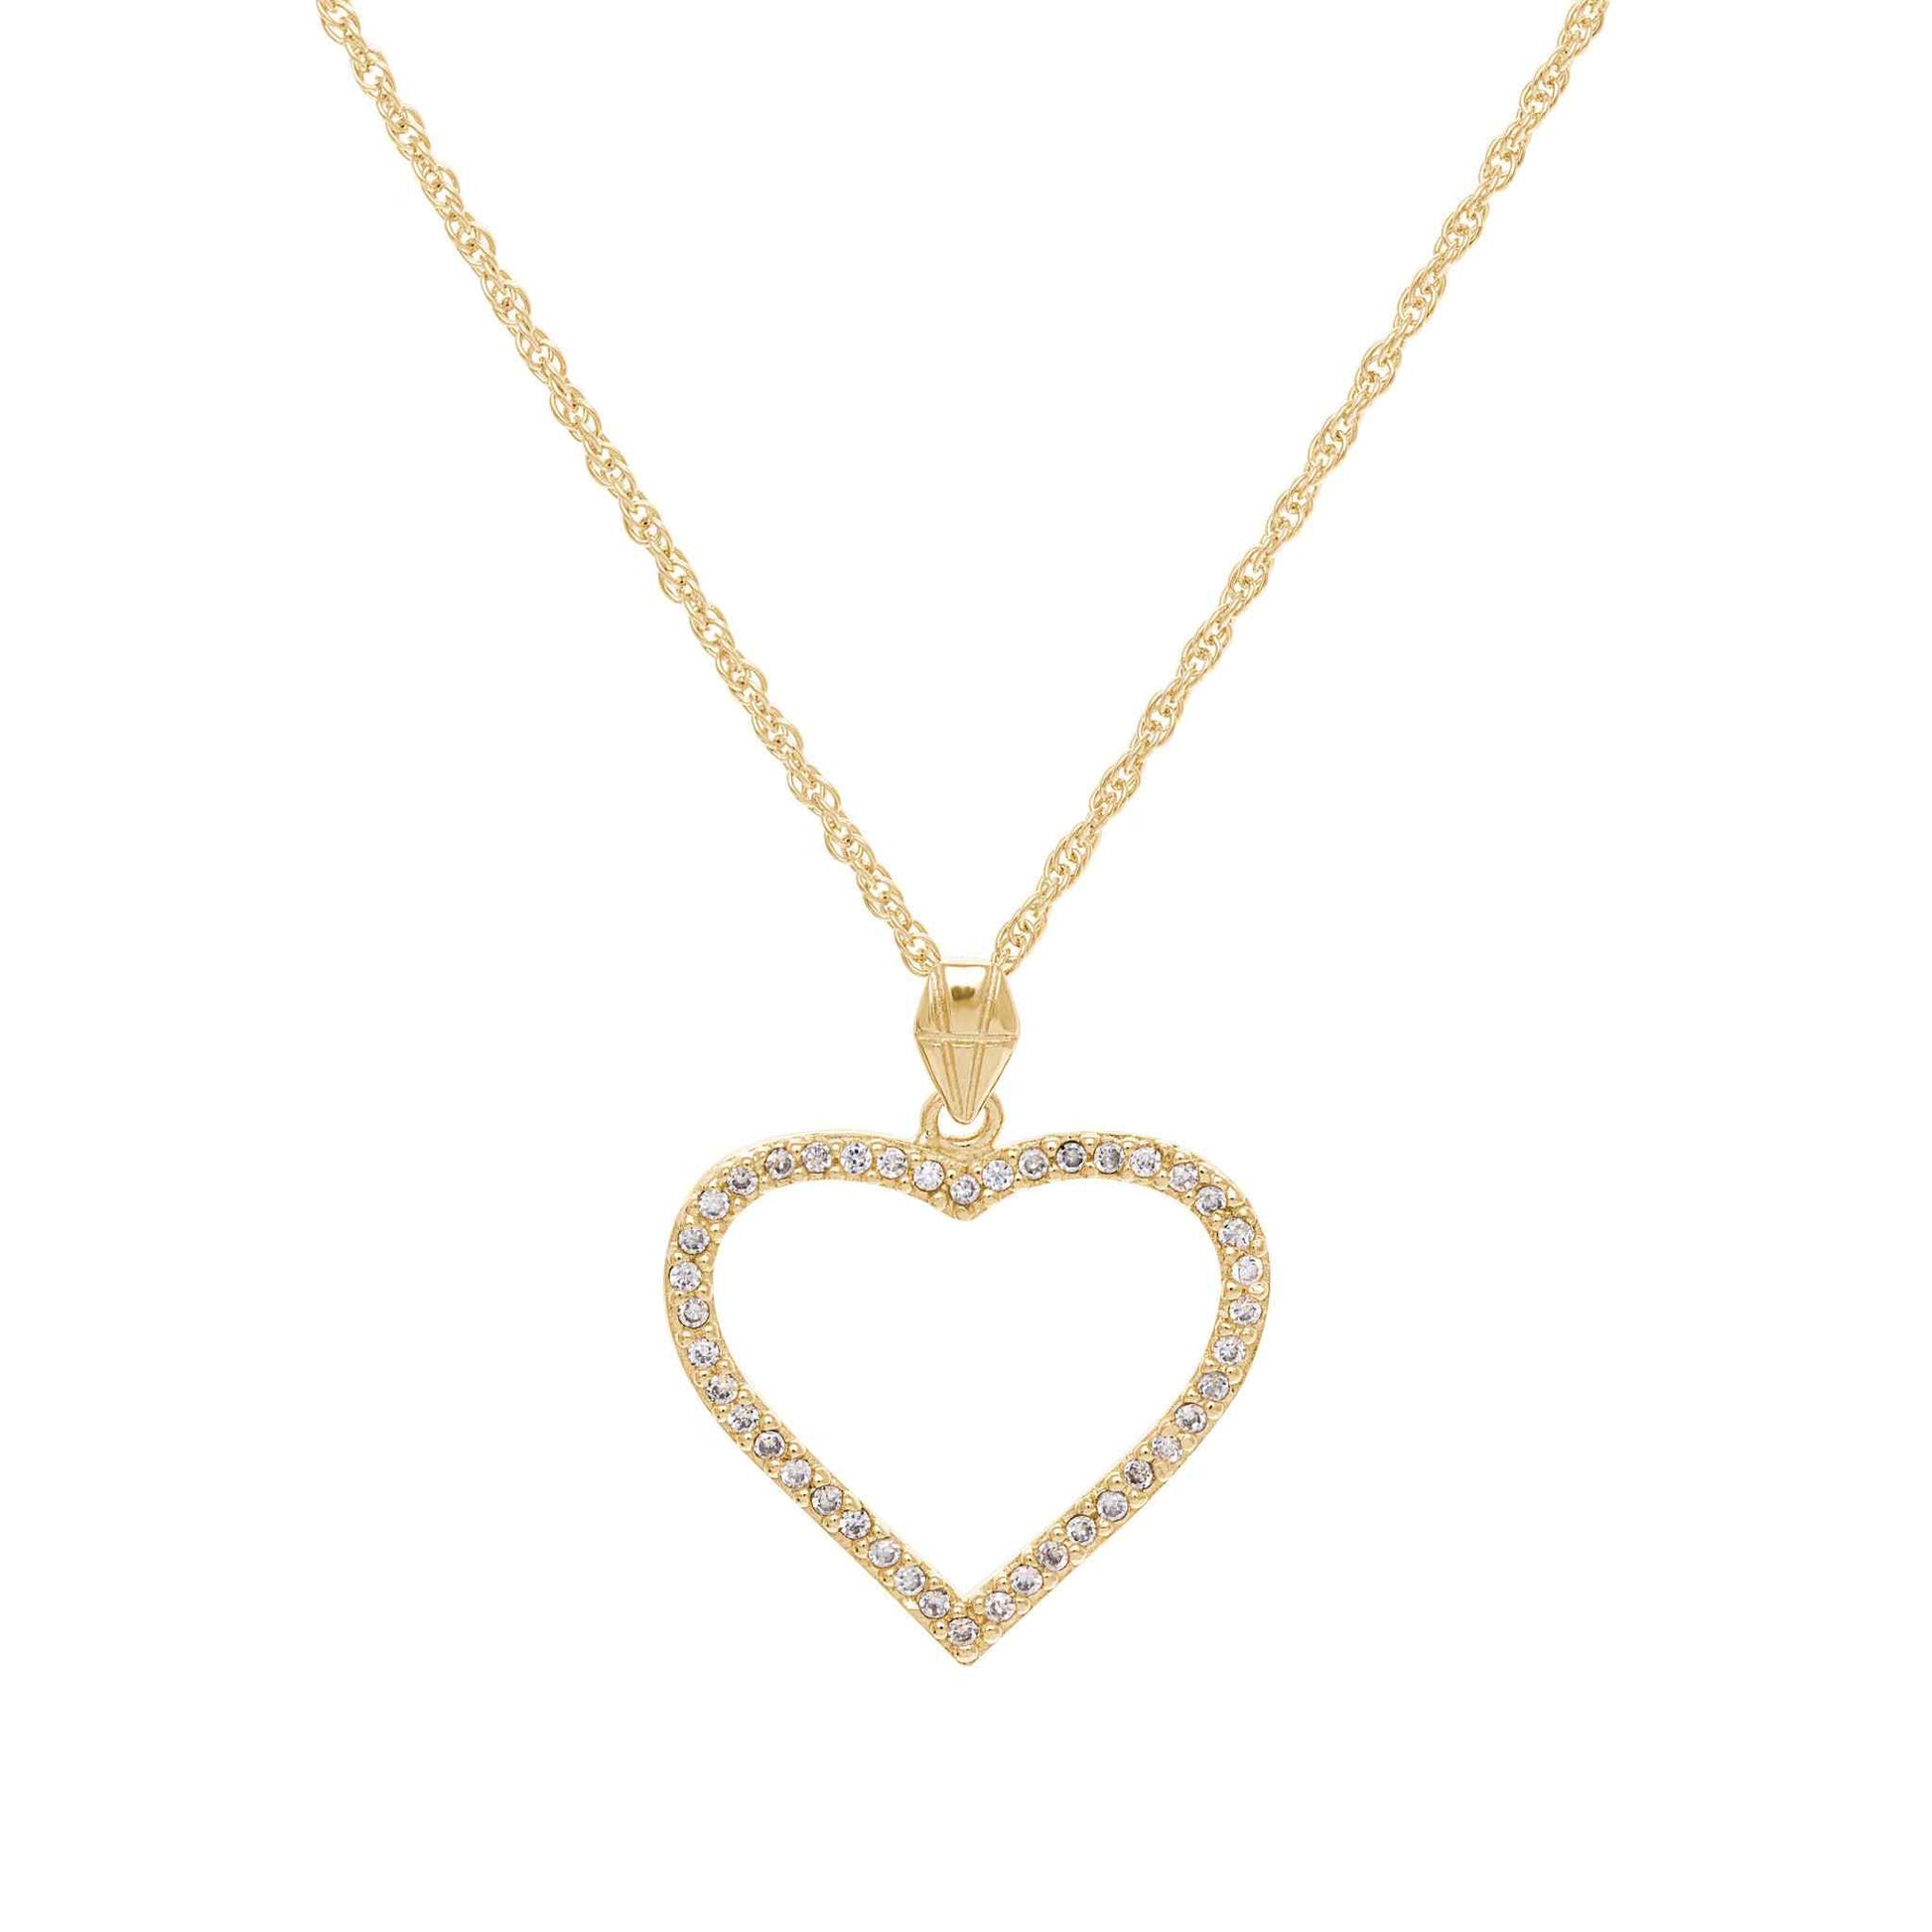 A simulated diamond heart necklace displayed on a neutral white background.